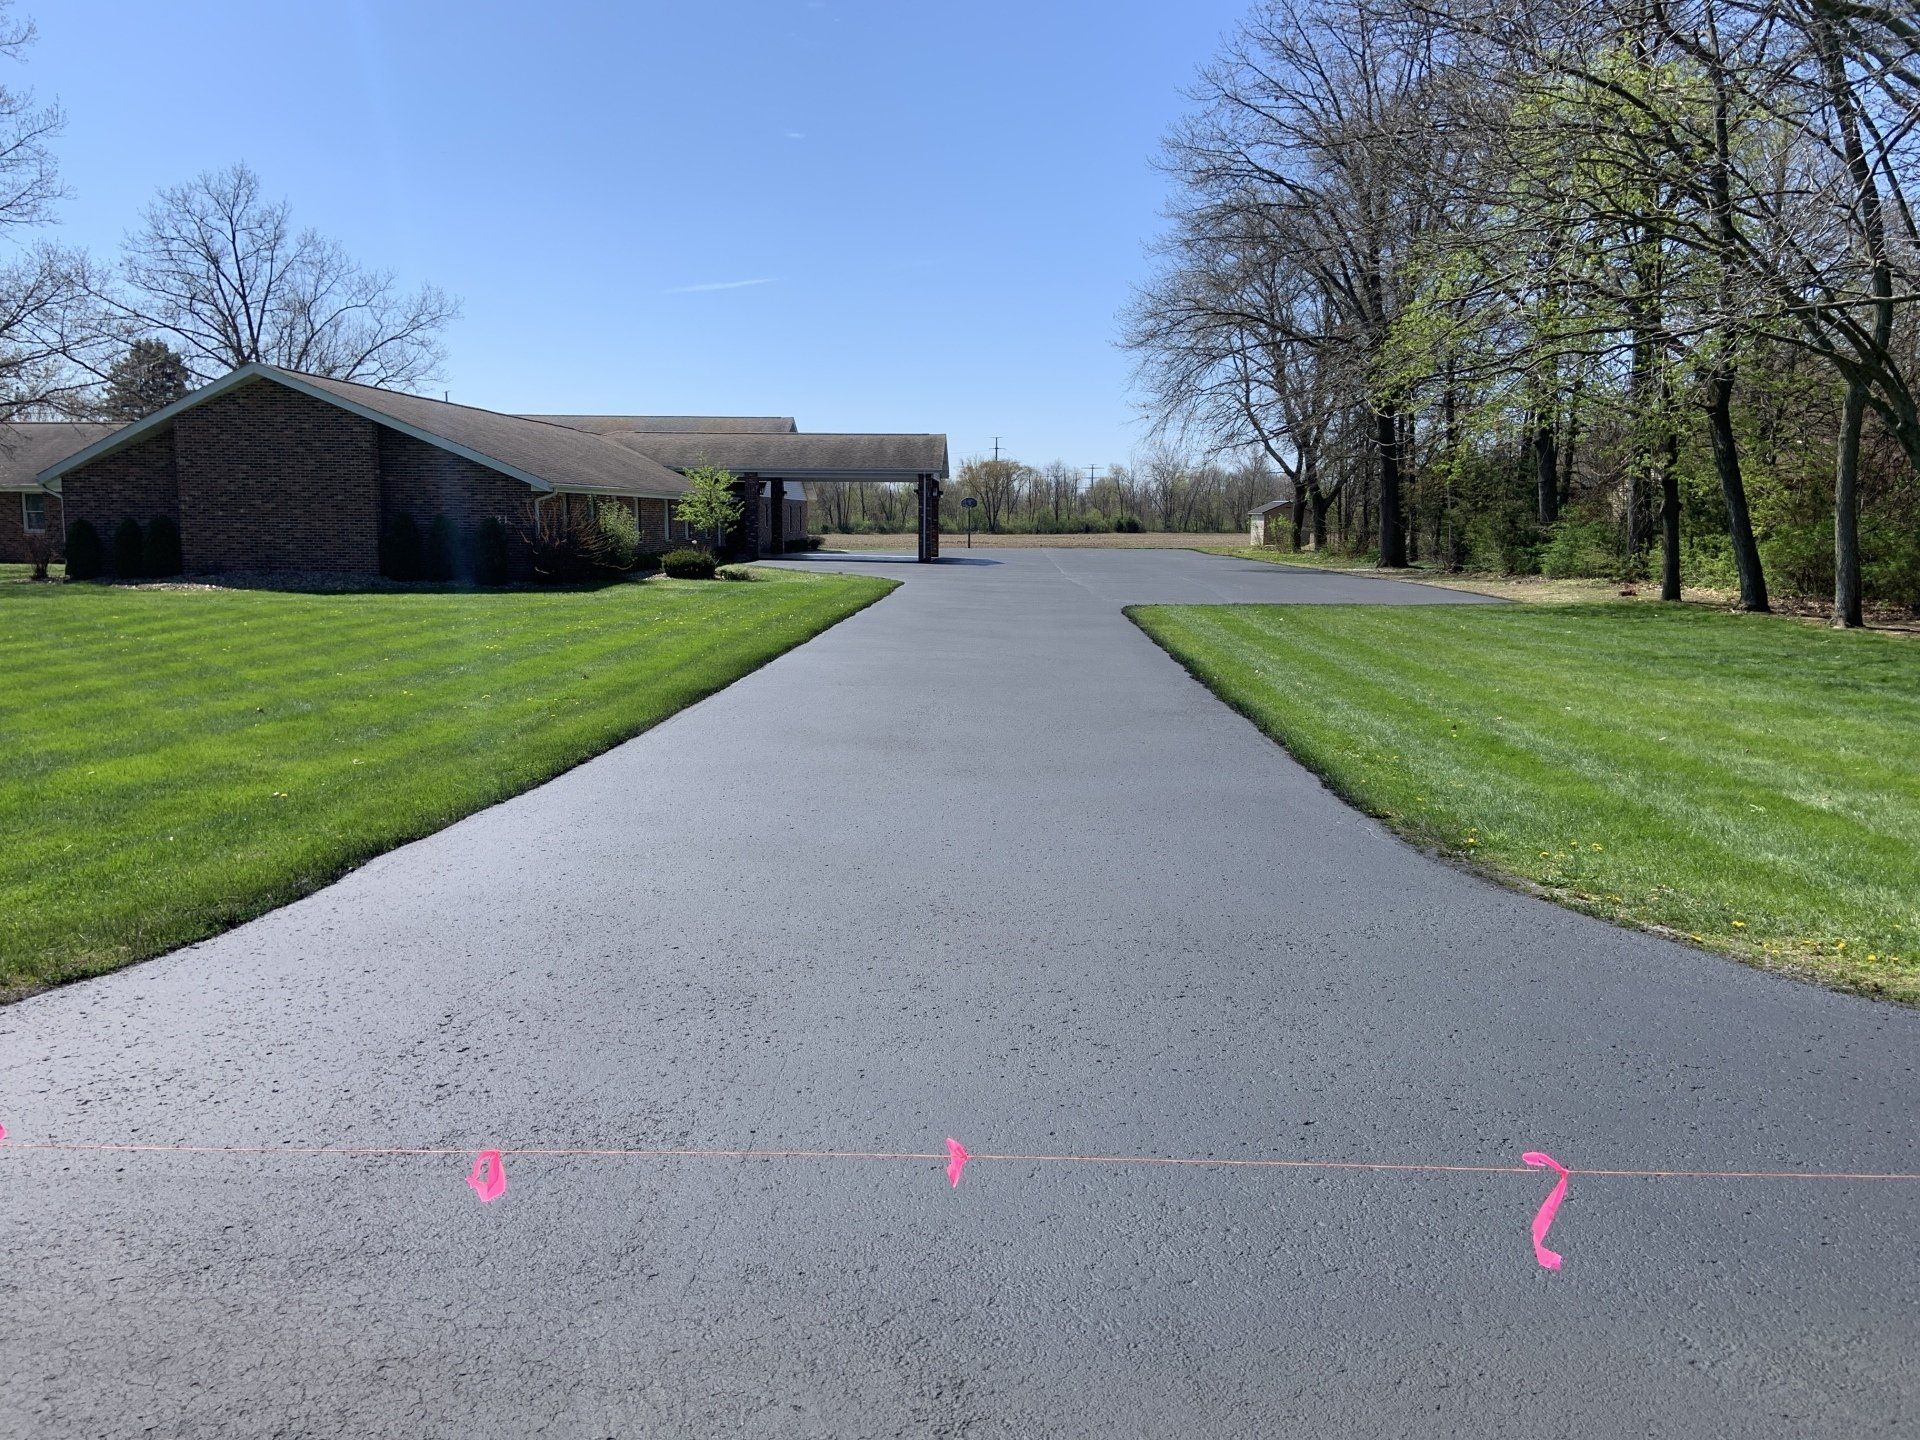 Spray sealcoat application of driveway and church parking lot in Milford, IN